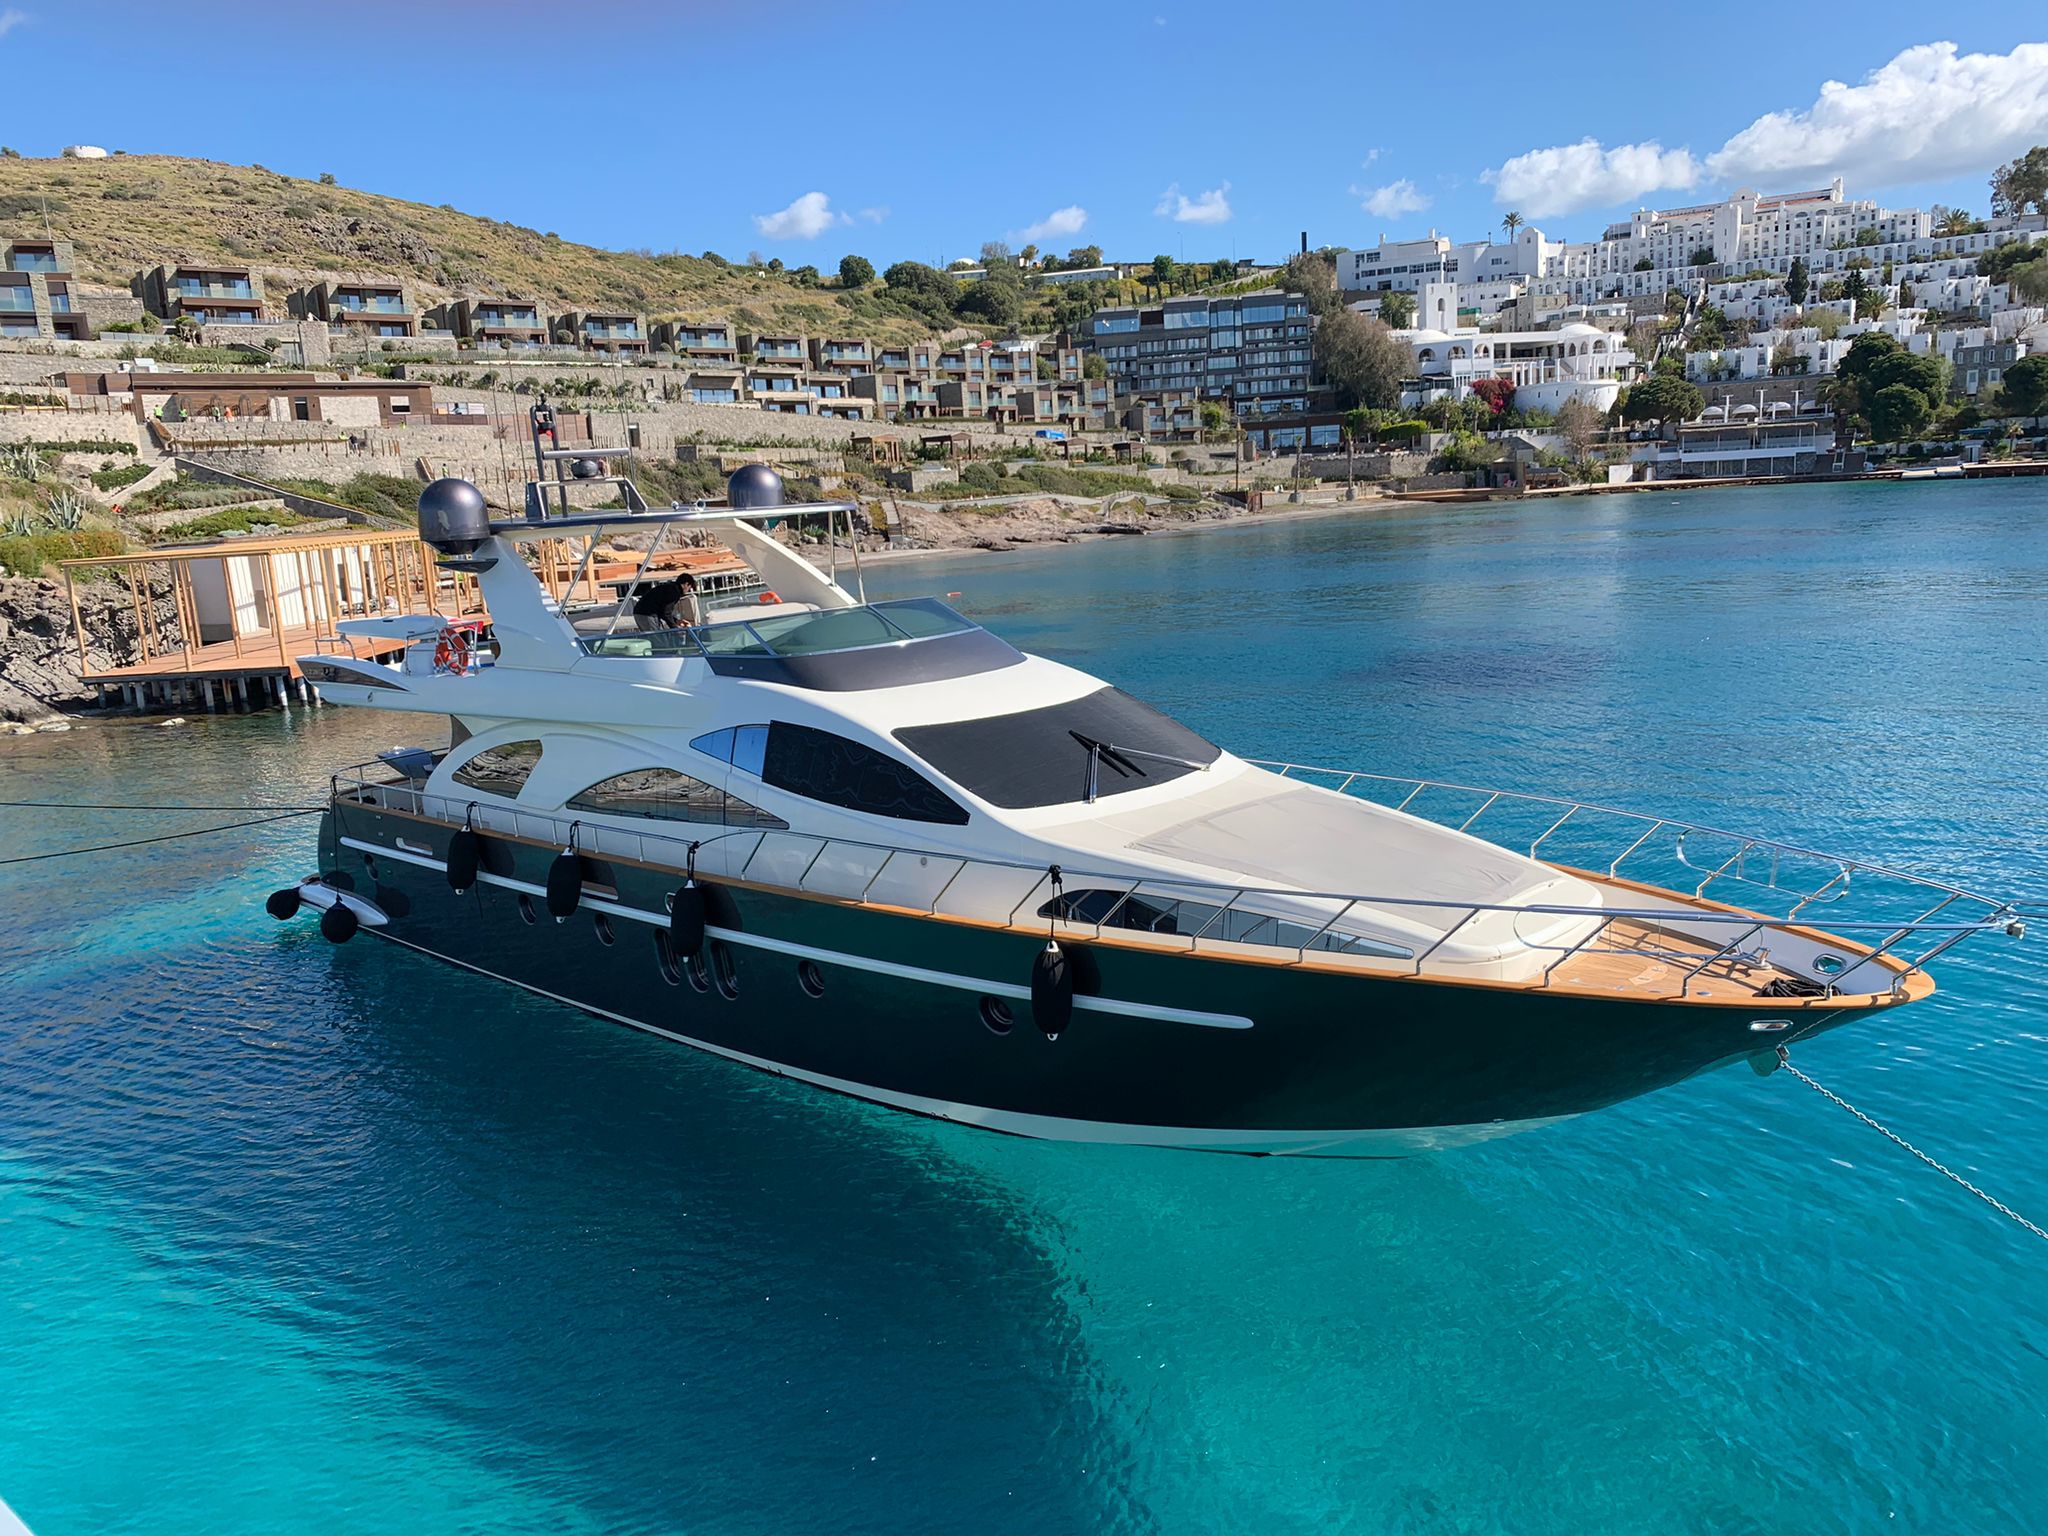 Azimut 80 - Superyacht charter Saint Vincent and the Grenadines & Boat hire in Greece Cyclades Islands Mykonos Mykonos 2